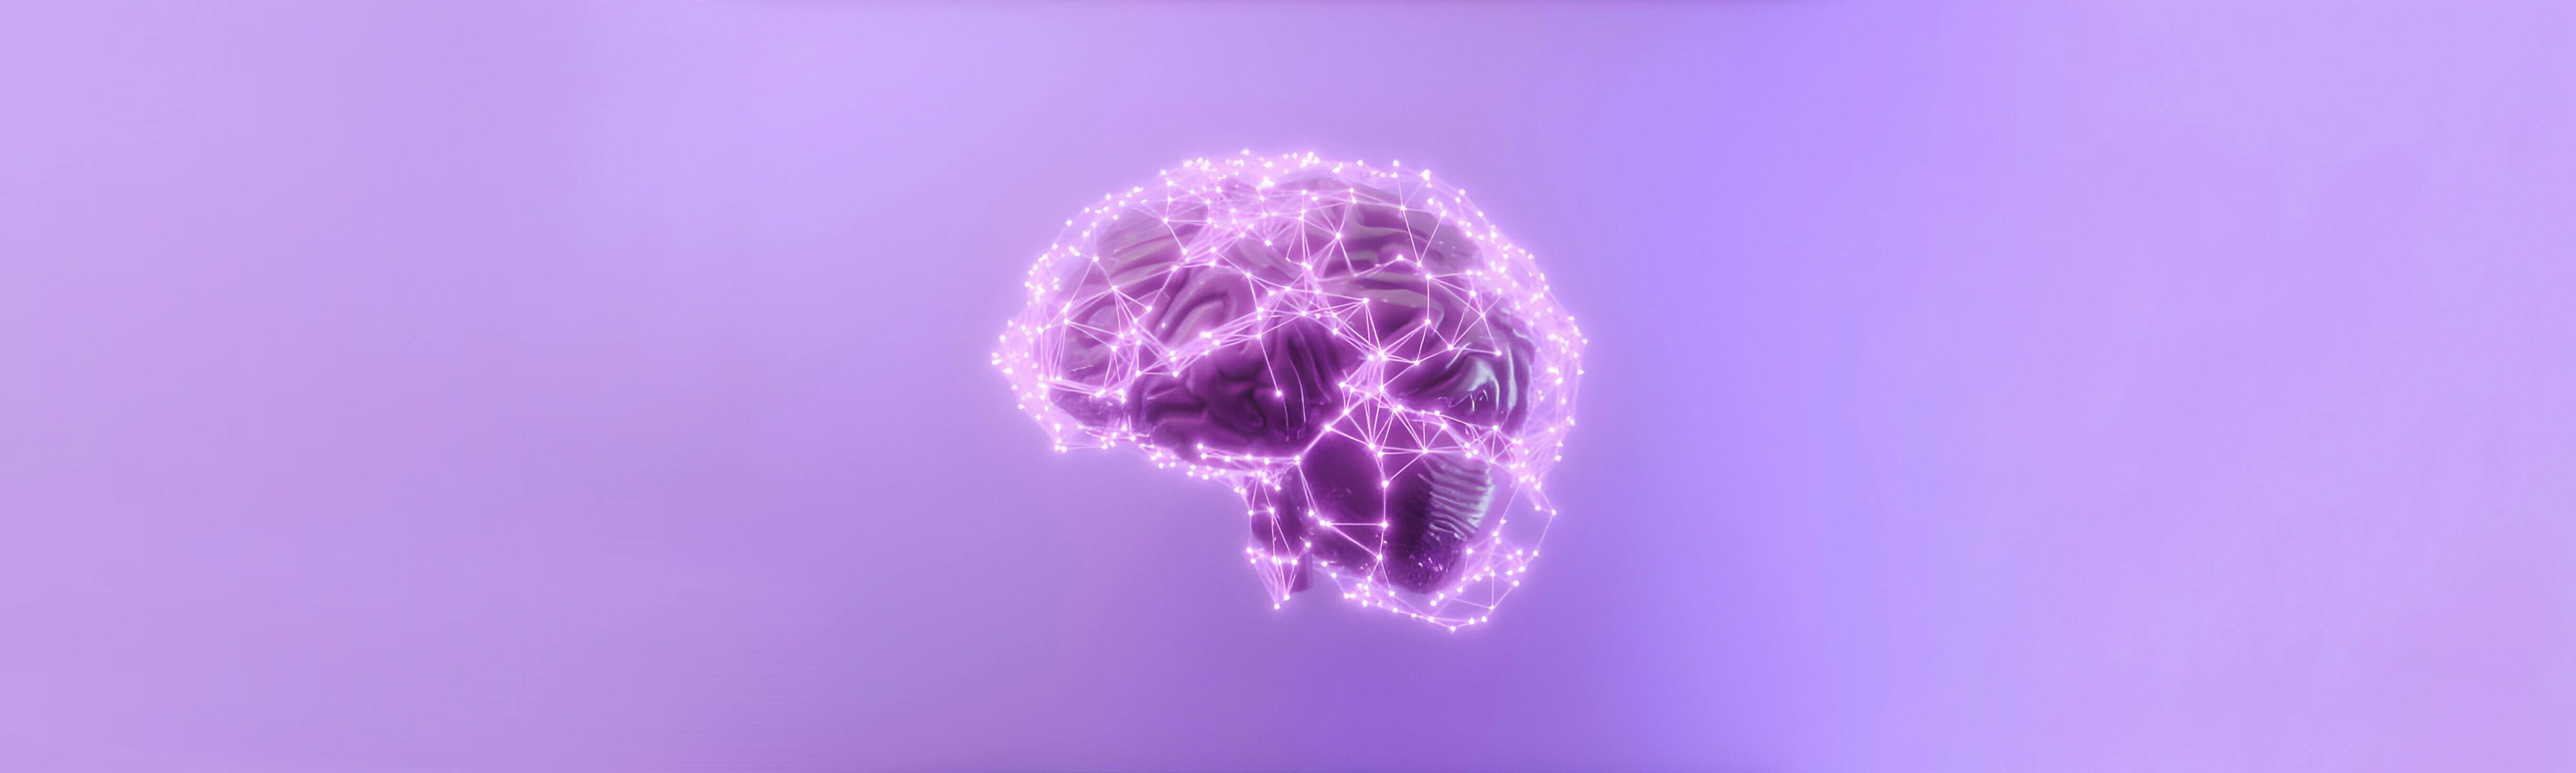 Graphic representation of a human brain and neuronal connections on a purple background.